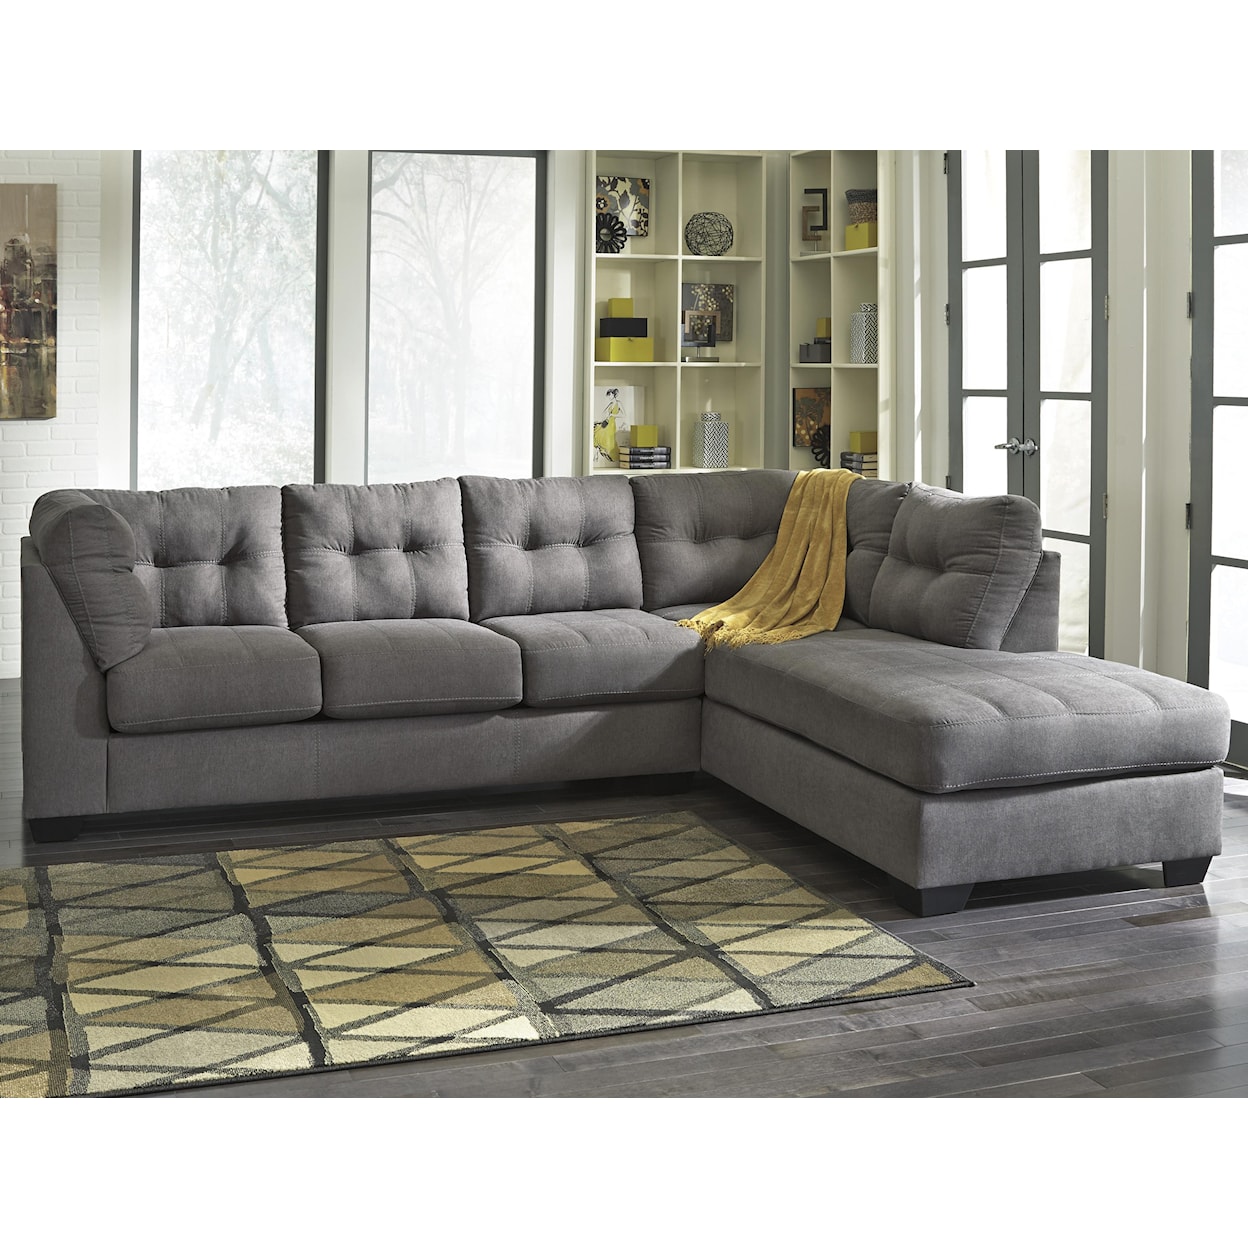 Benchcraft Maier - Charcoal 2-Piece Sectional with Right Chaise